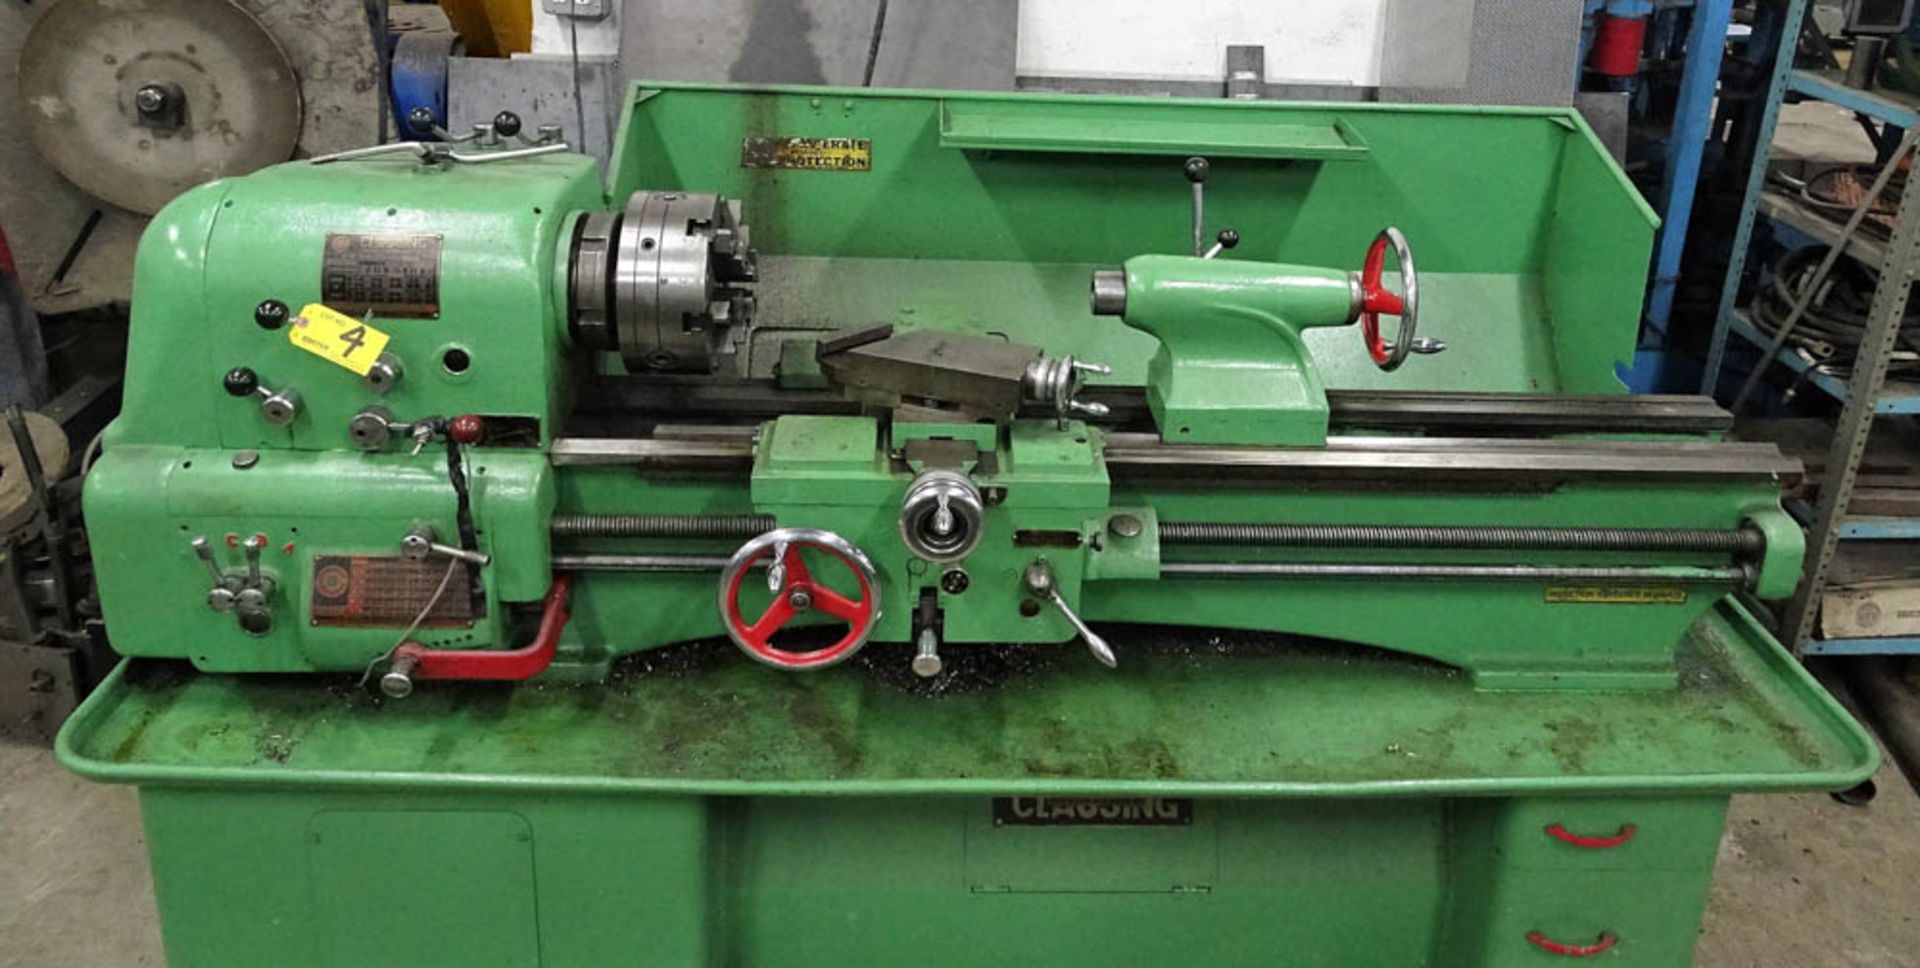 CLAUSING GEAR HEAD ENGINE LATHE WITH 60" TABLE, 10" 6-JAW CHUCK, 13" SWING